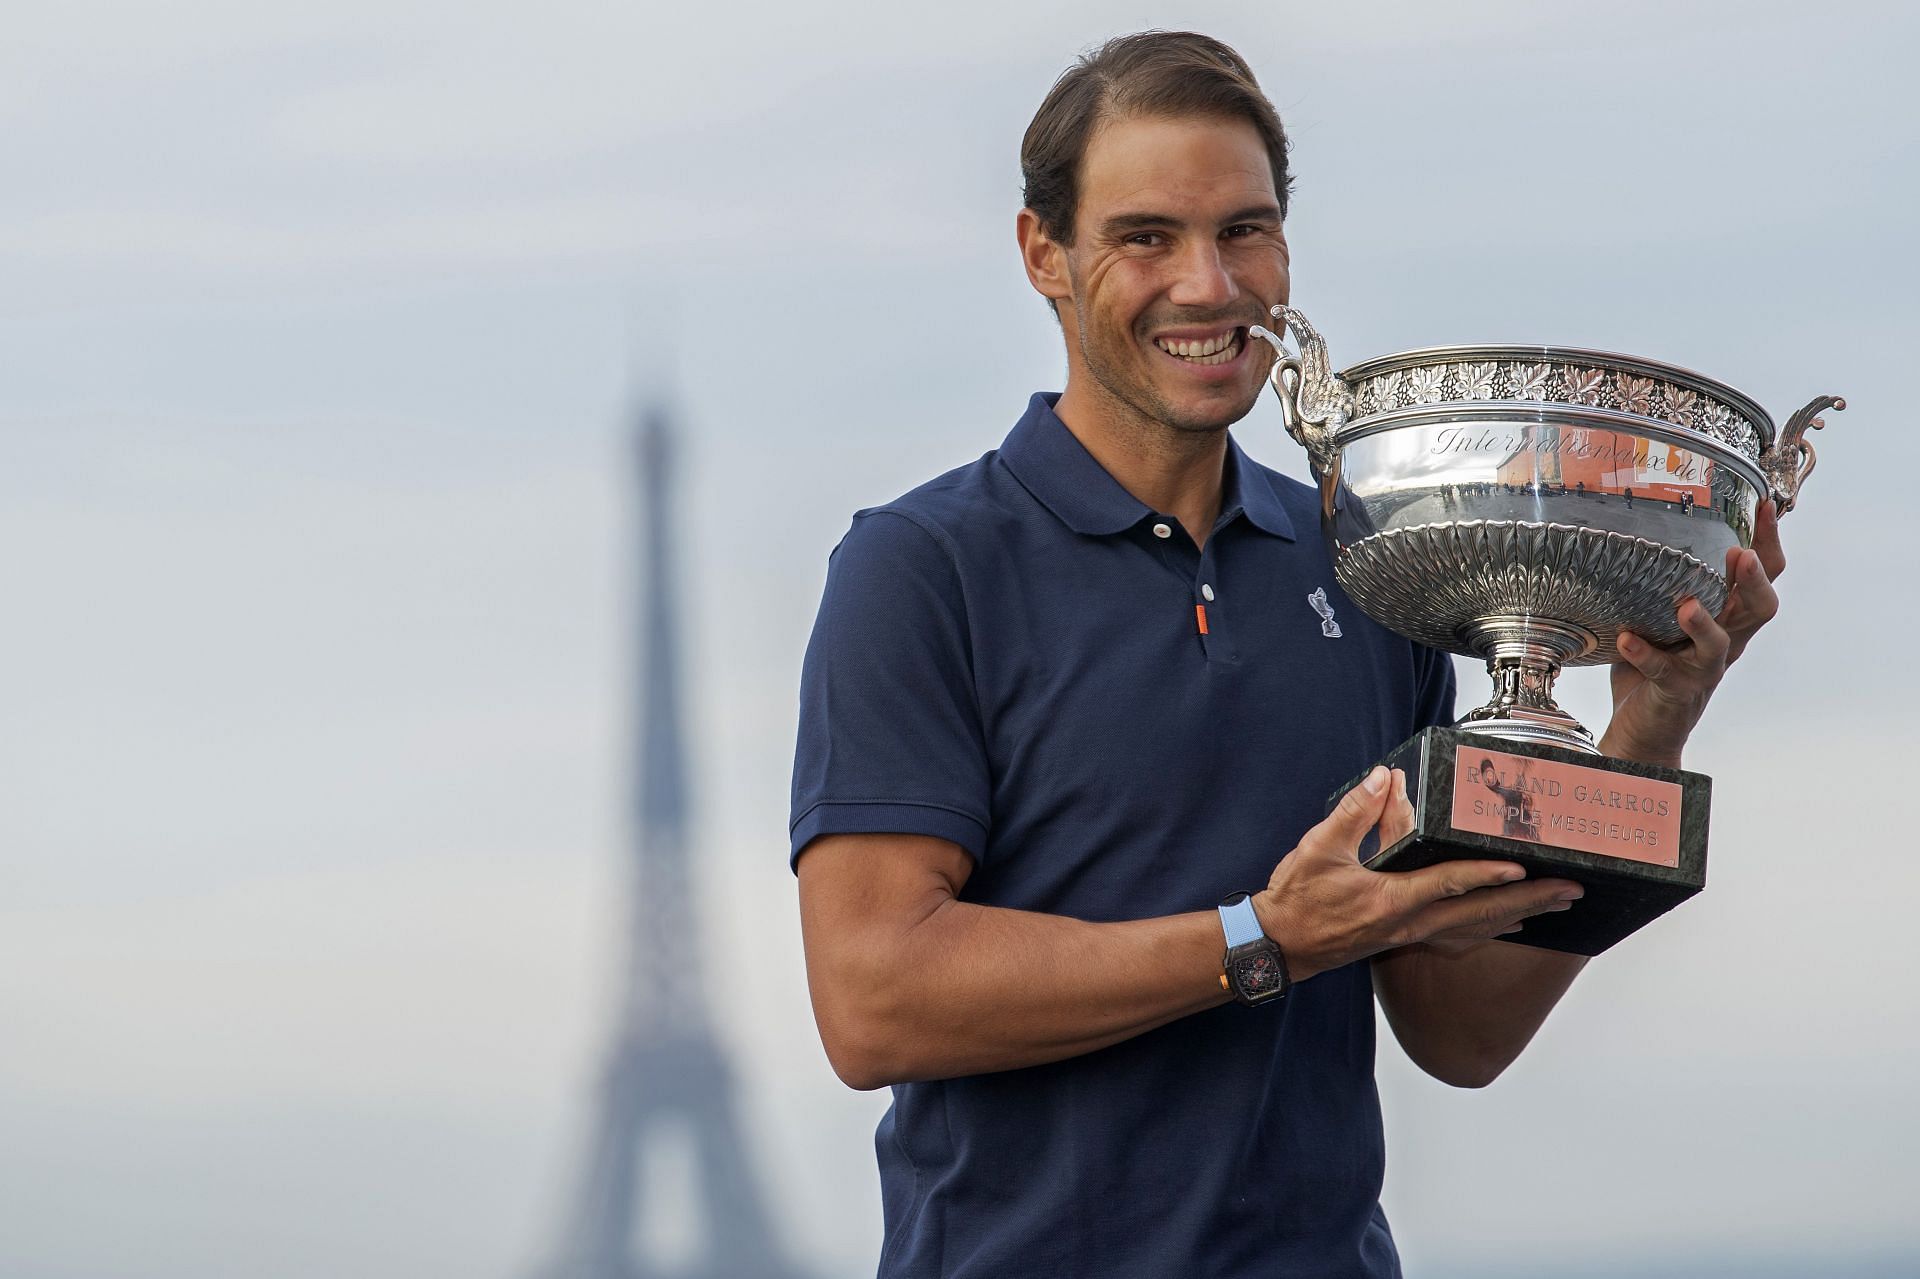 Where to watch French Open 2022 in USA?